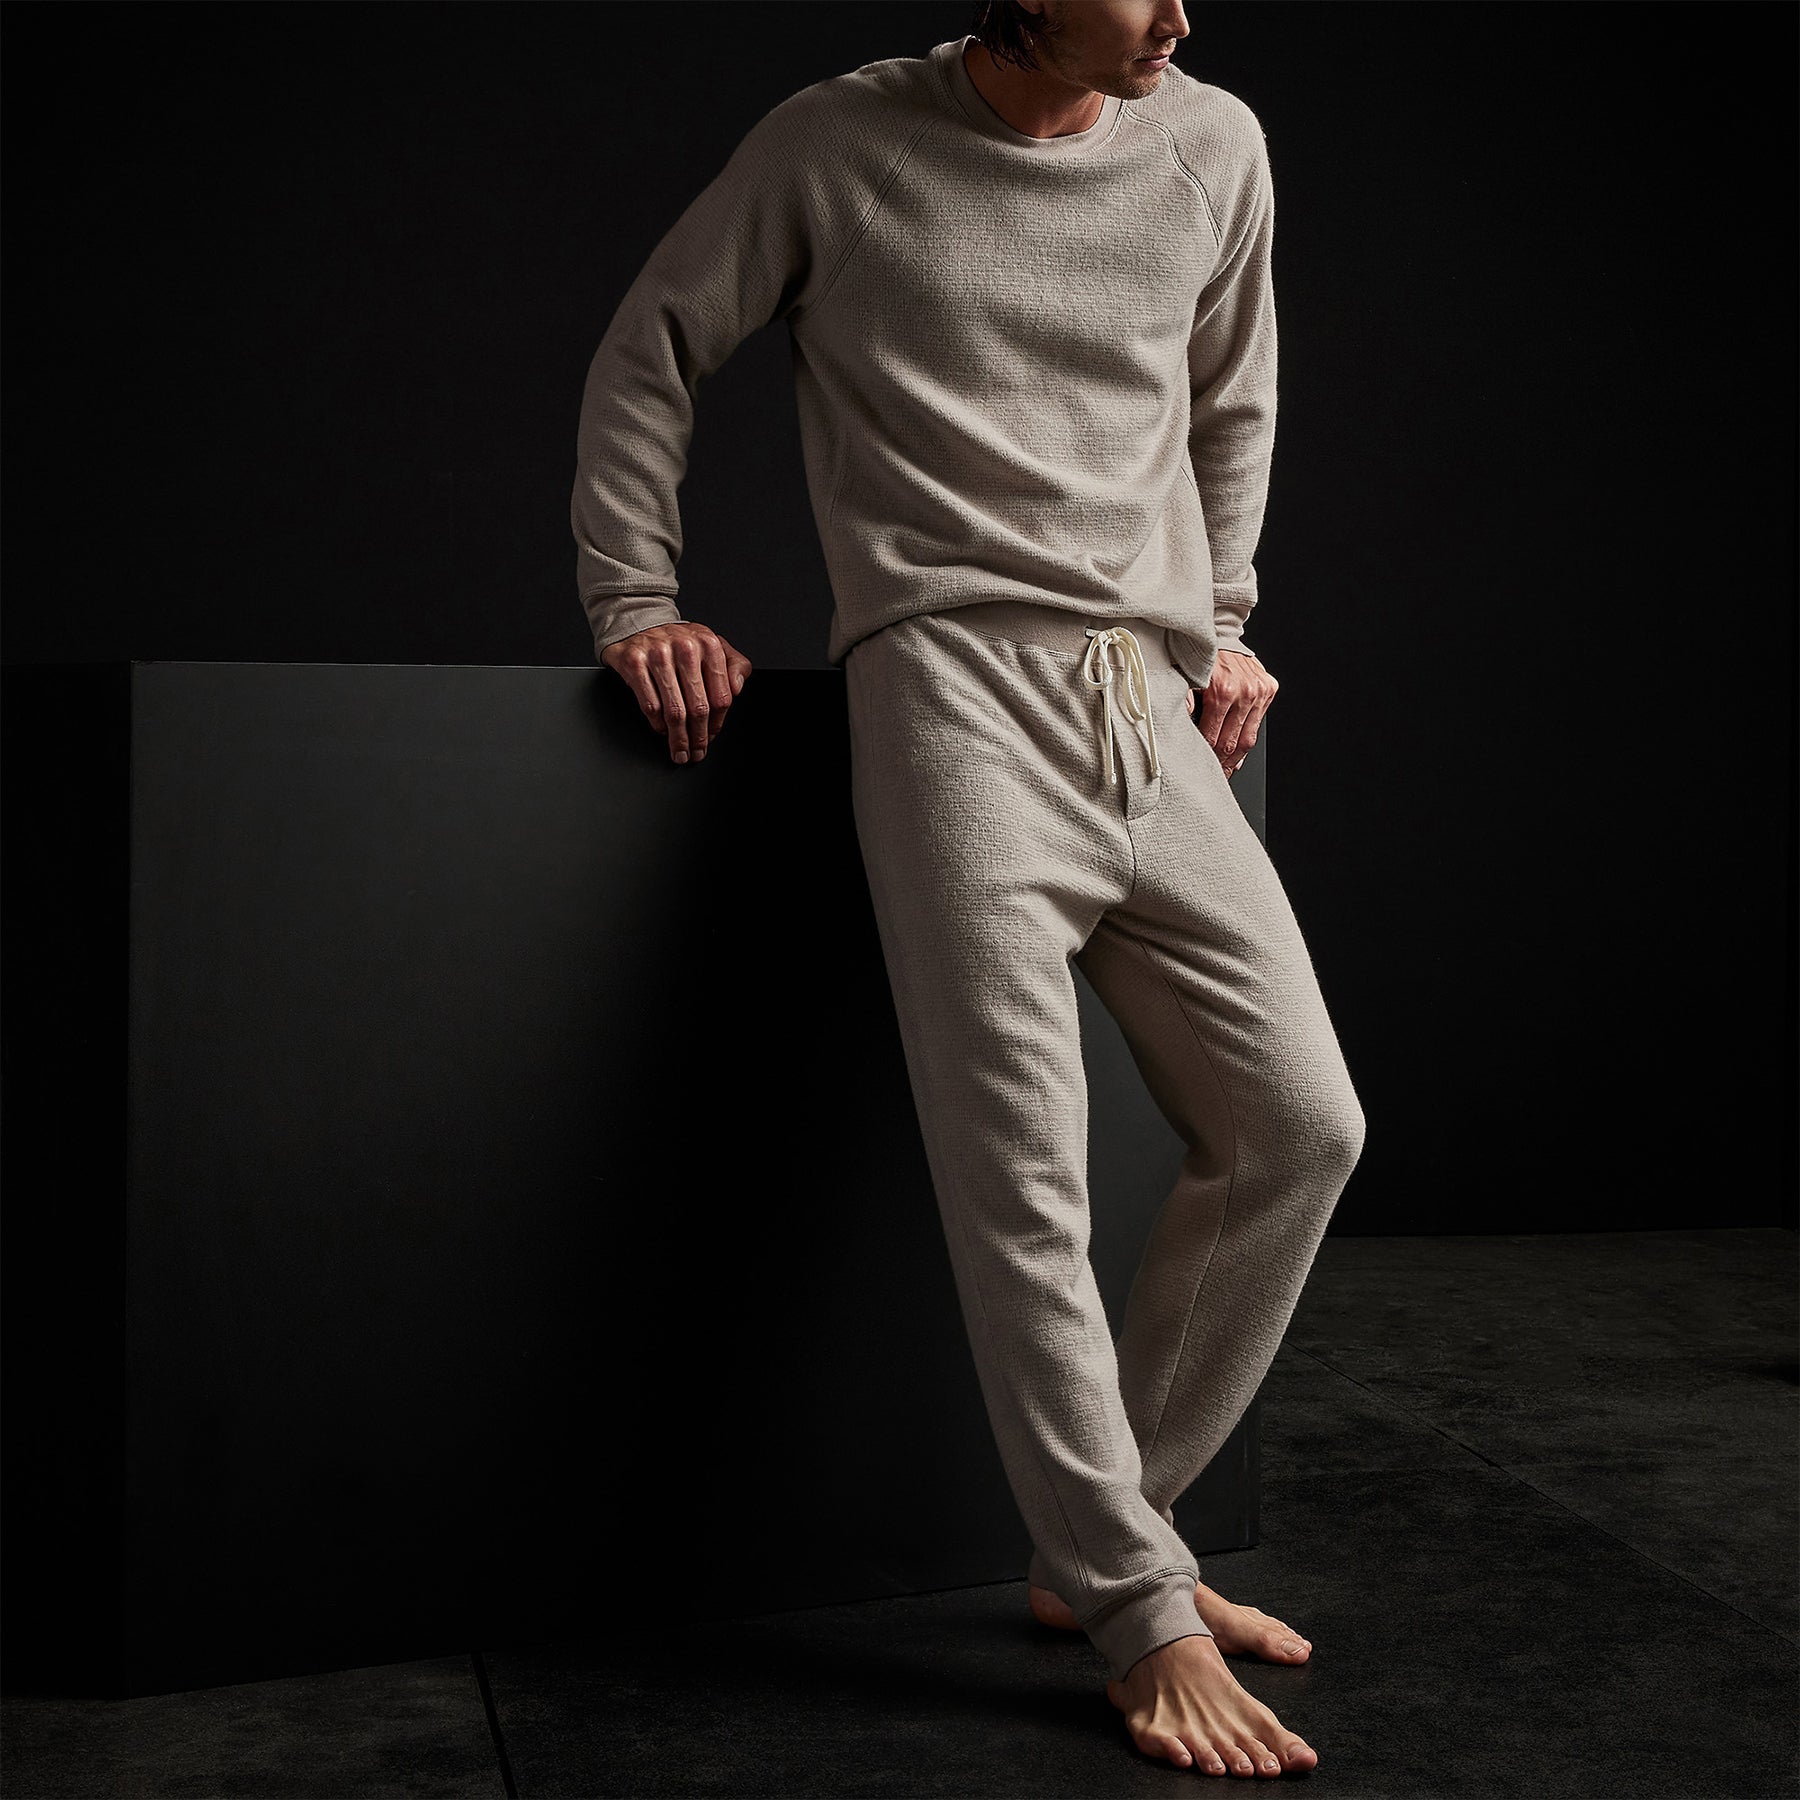 Buy Cashmere Suit, Knitted Wool Cashmere Lounge Set, Cashmere Knit